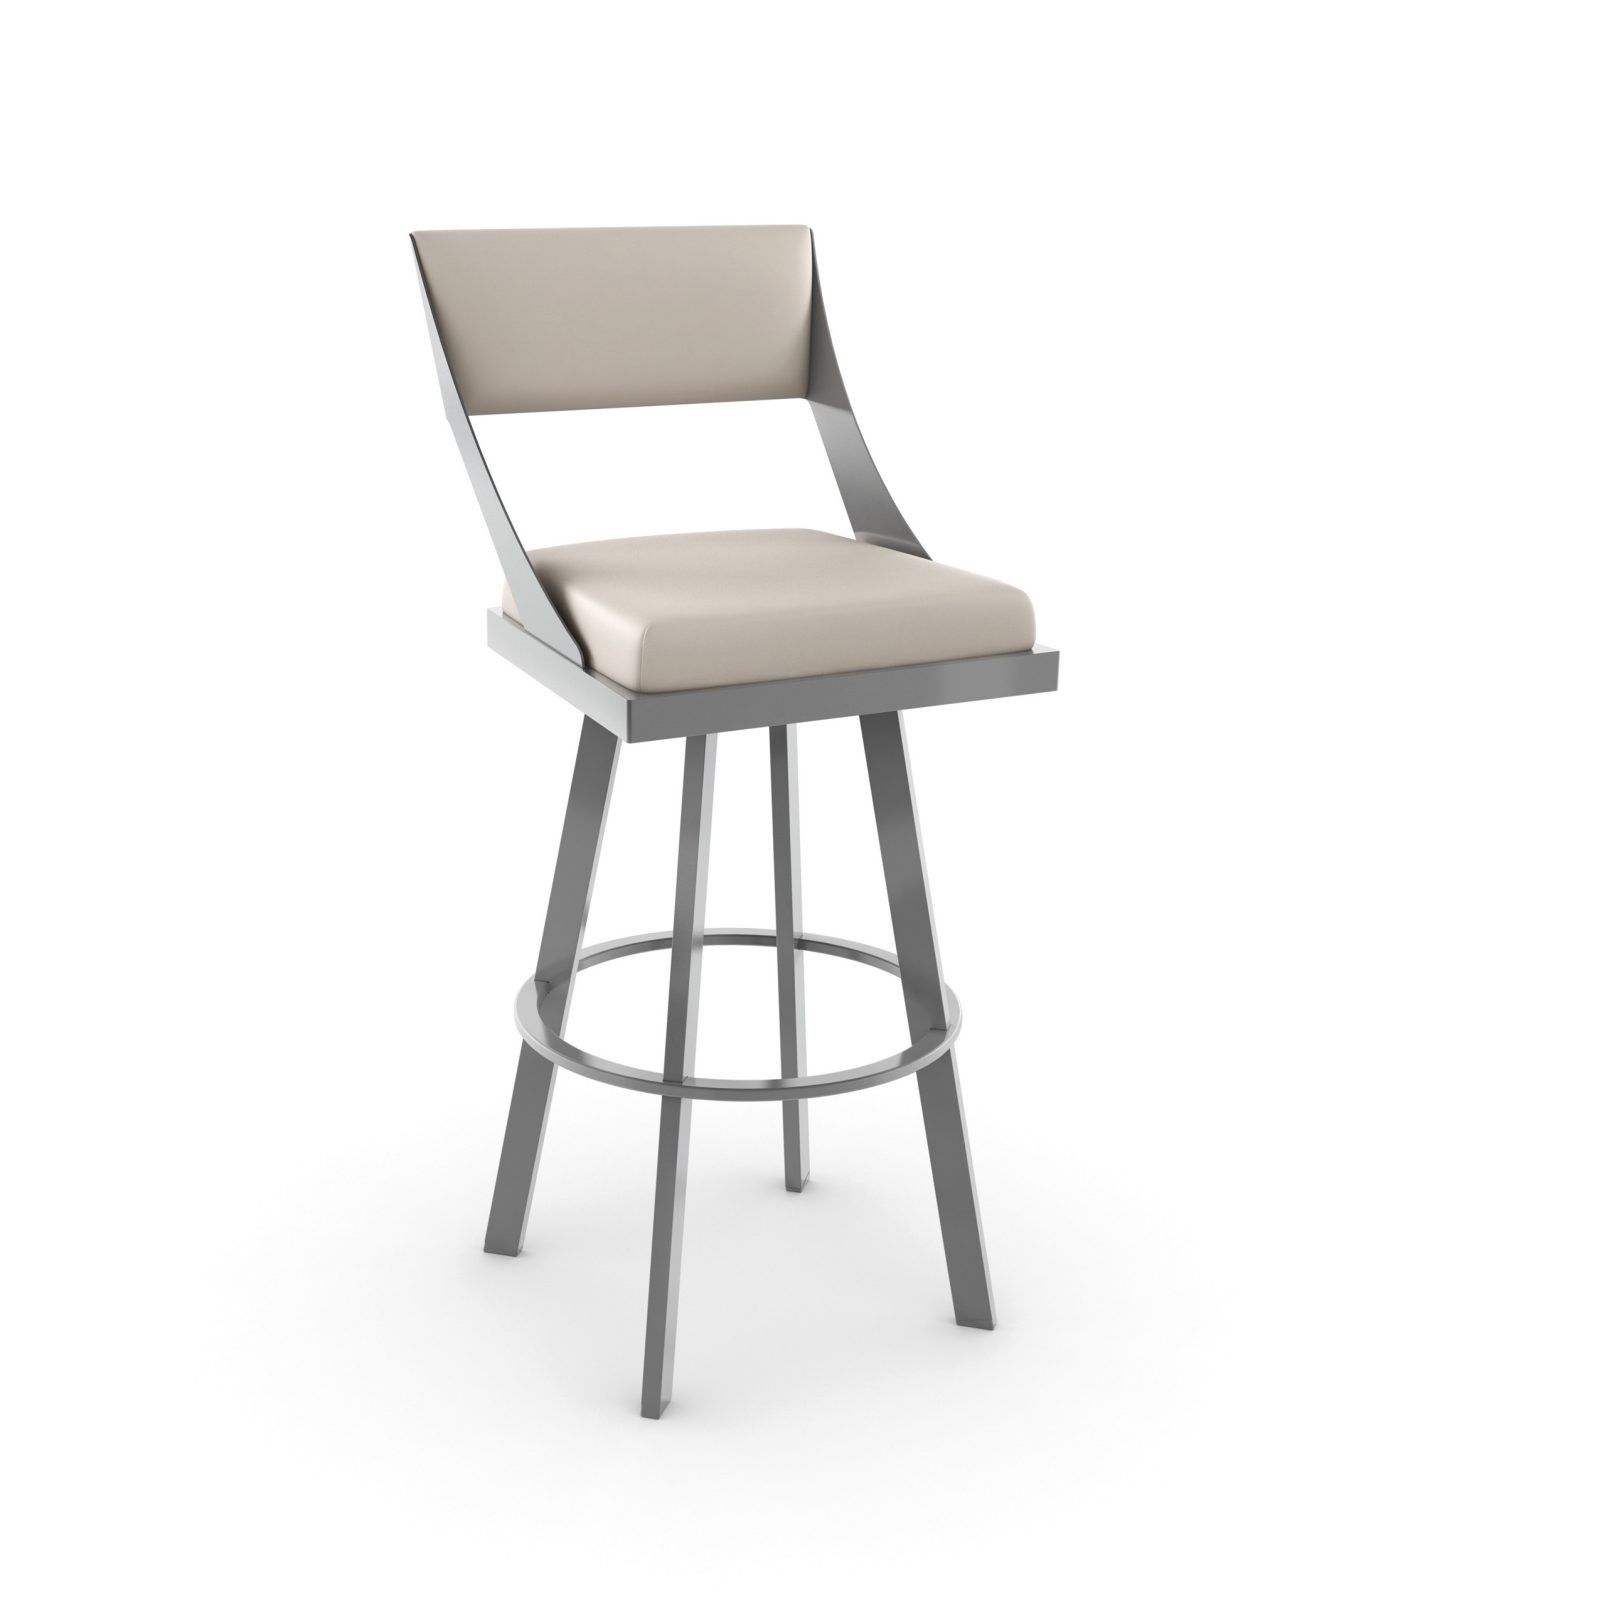 Metal Finish: 24 Magnetite • Seat and Back Covering: DB Oyster